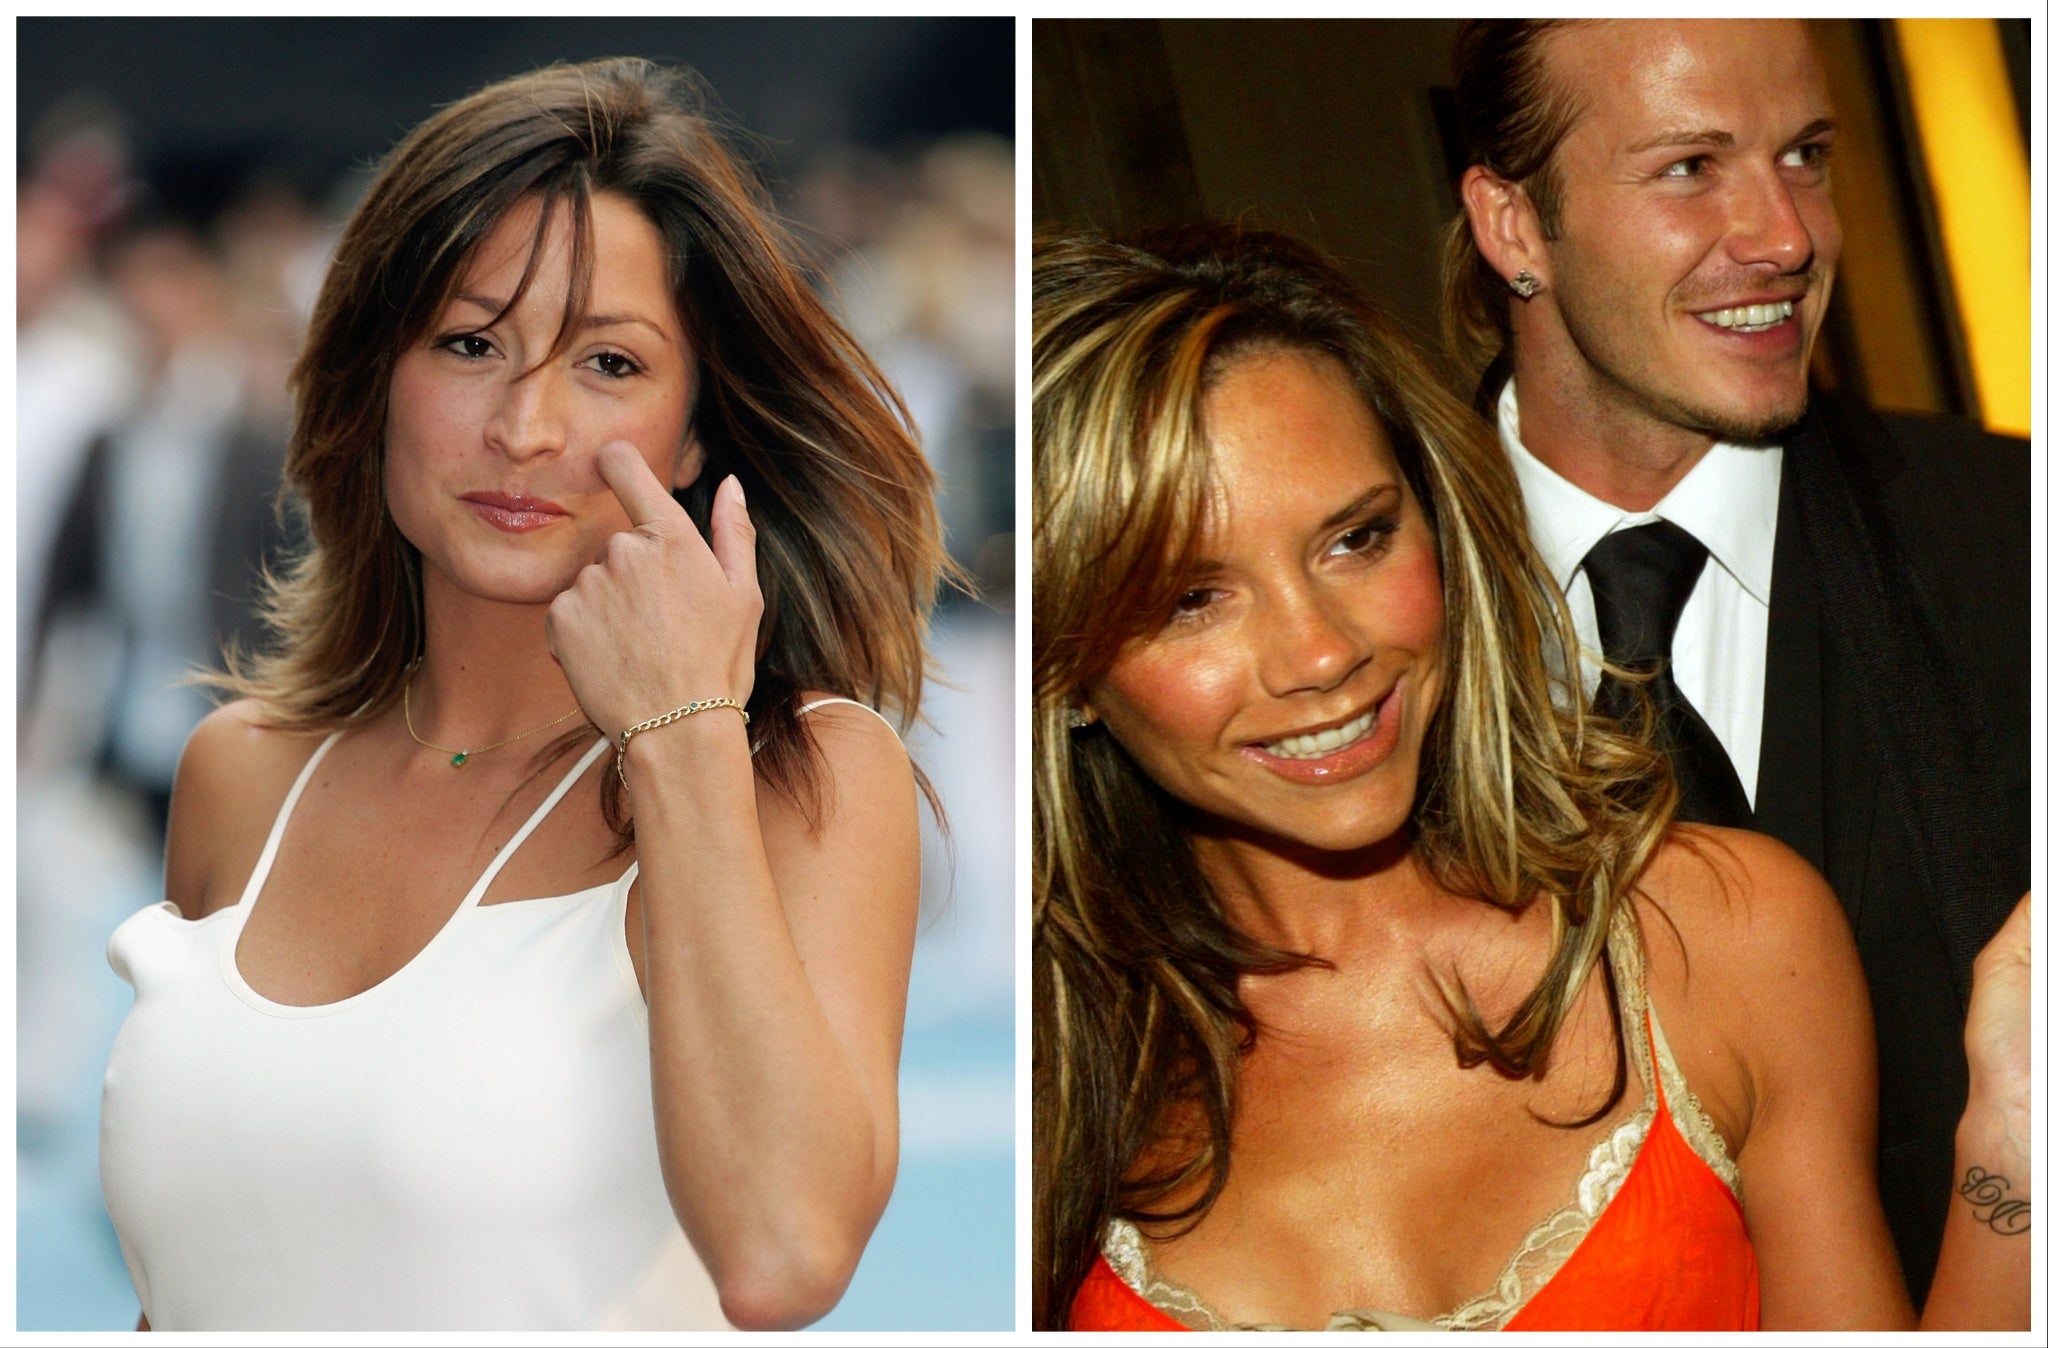 Left: Rebecca Loos pictured in 2005, and Victoria and David Beckham in 2004, the year the alleged ‘affair’ scandal broke